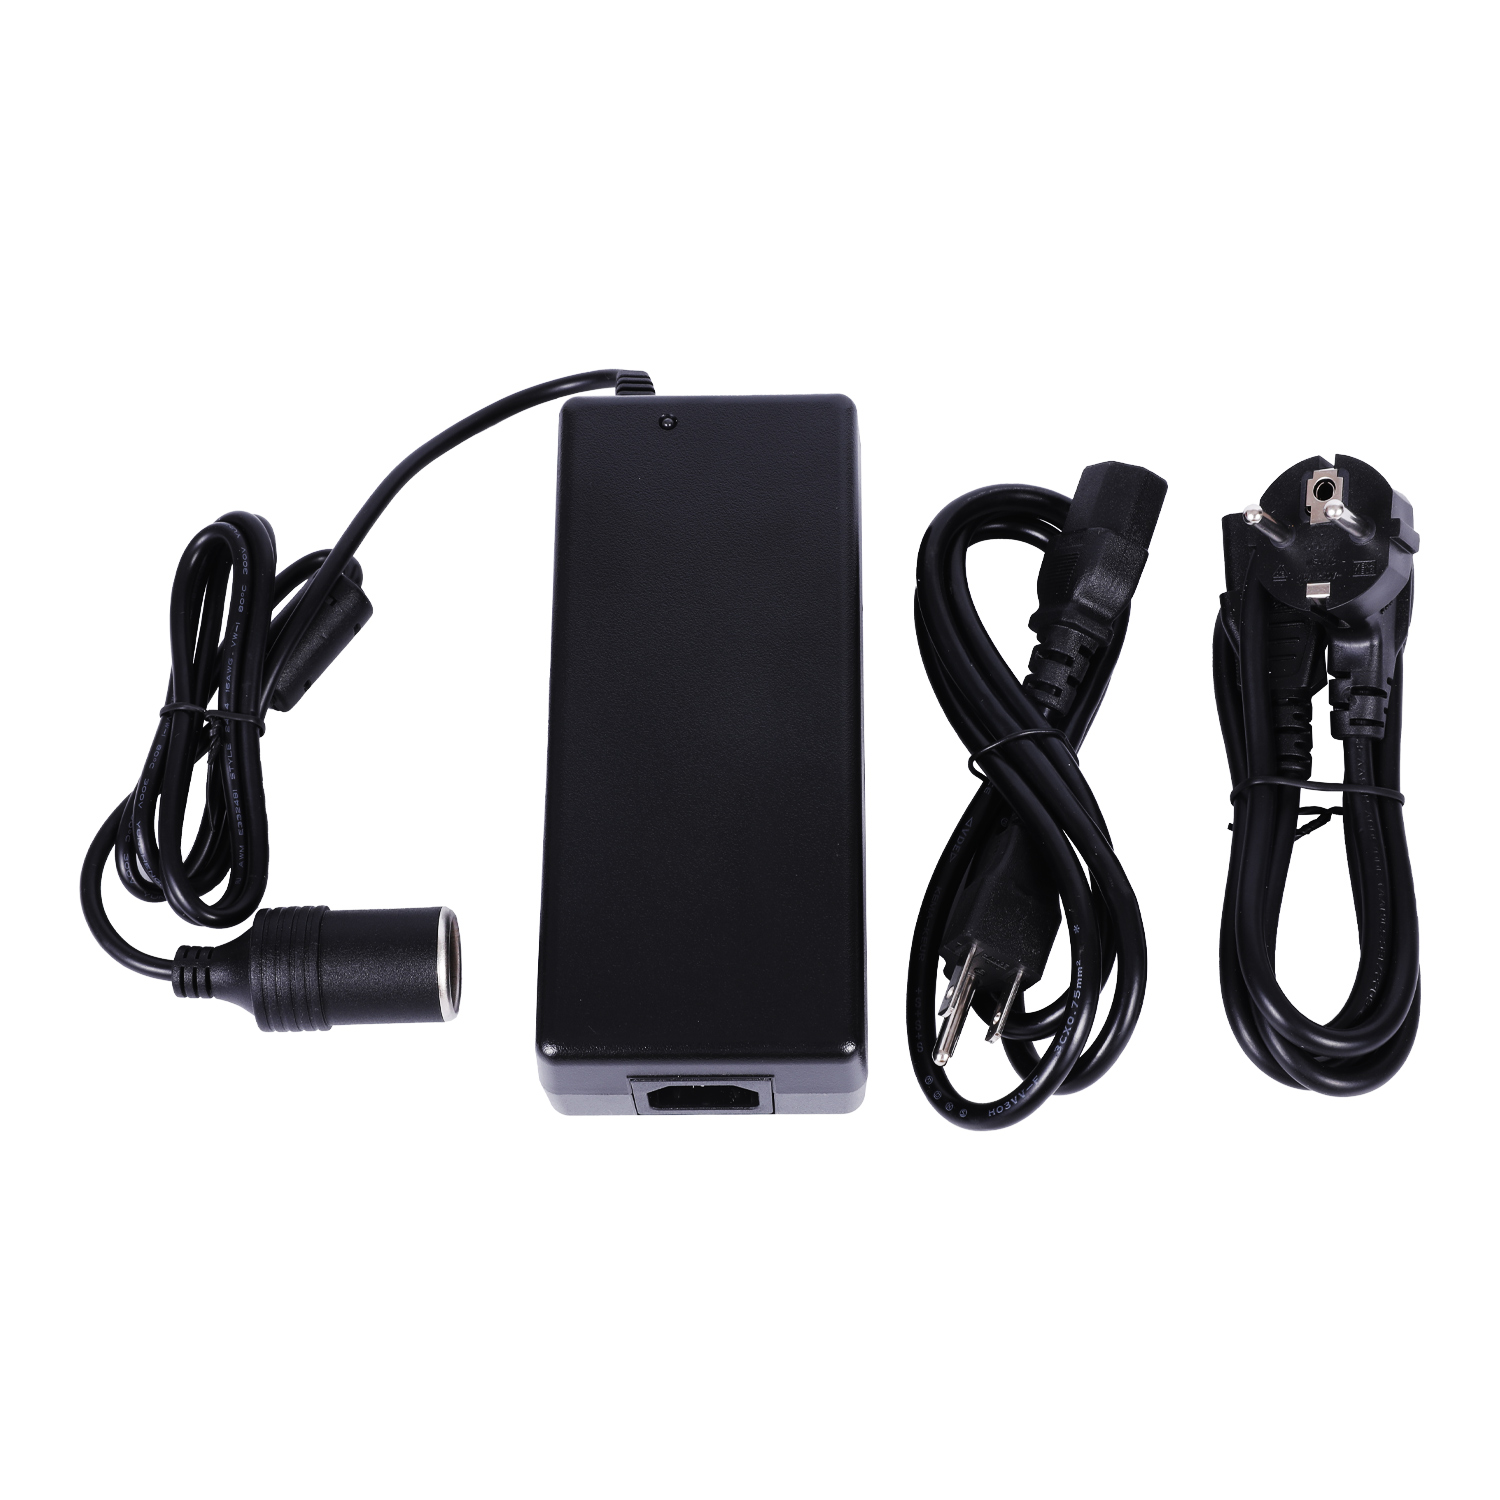 Cigarette lighter AC to dc 36V 4A power adapter with CE